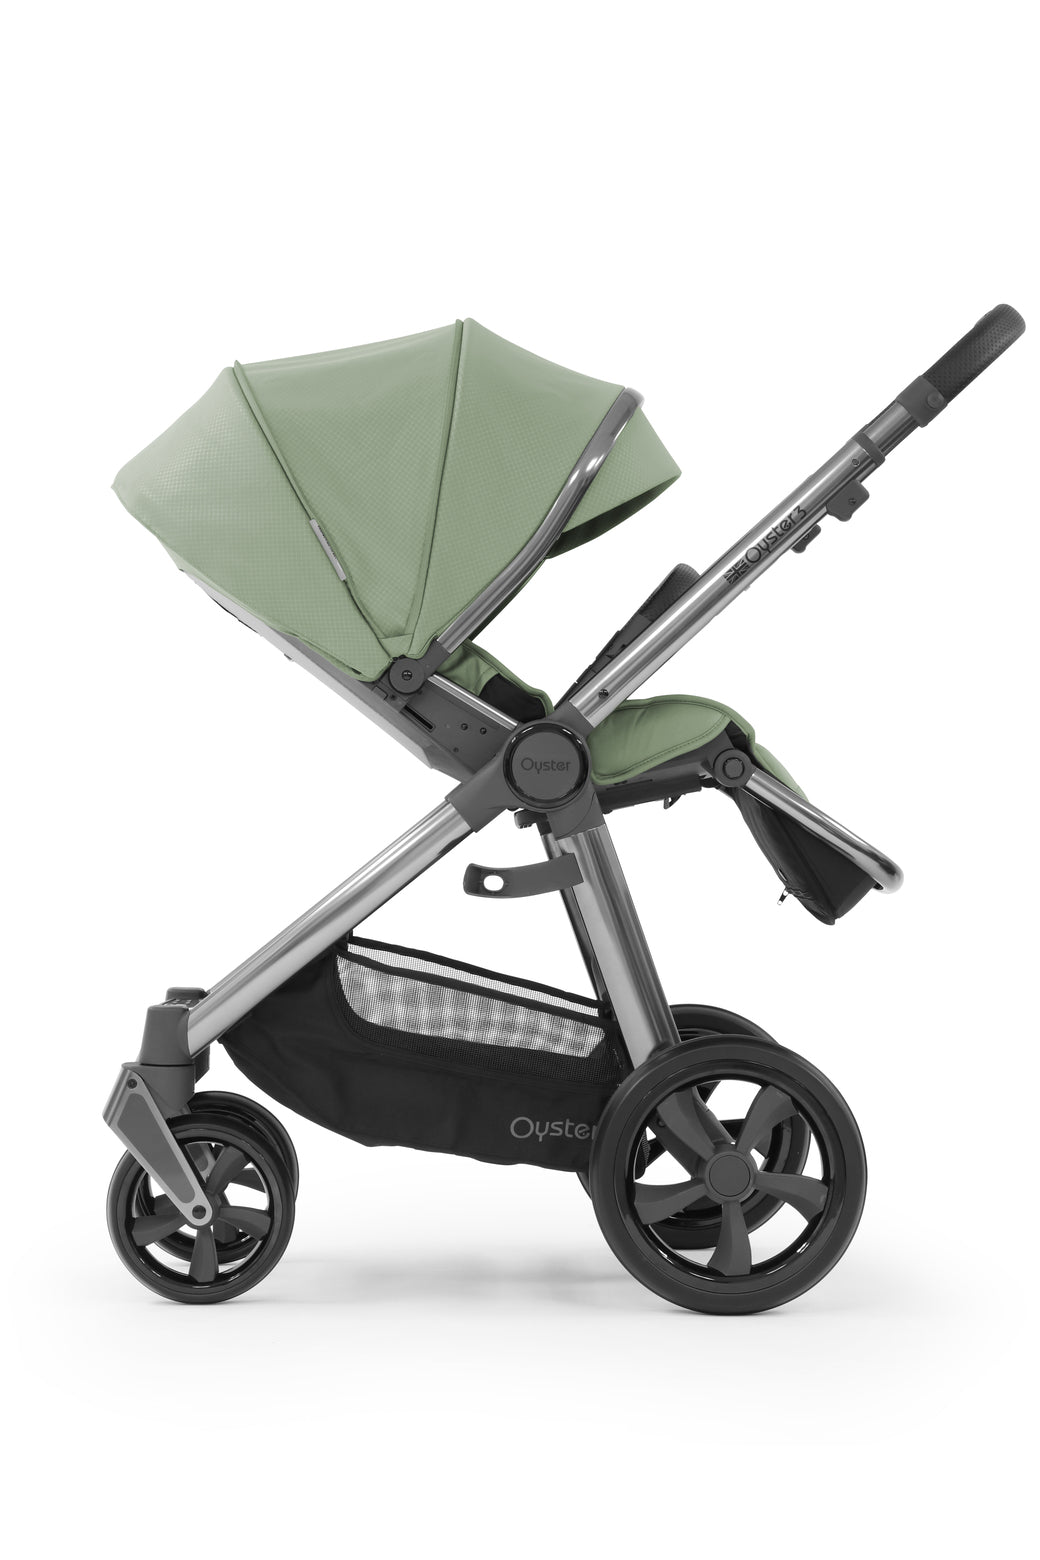 Babystyle Oyster 3 Essential 5 Piece Travel System Bundle With Carbriofix - Spearmint - For Your Little One